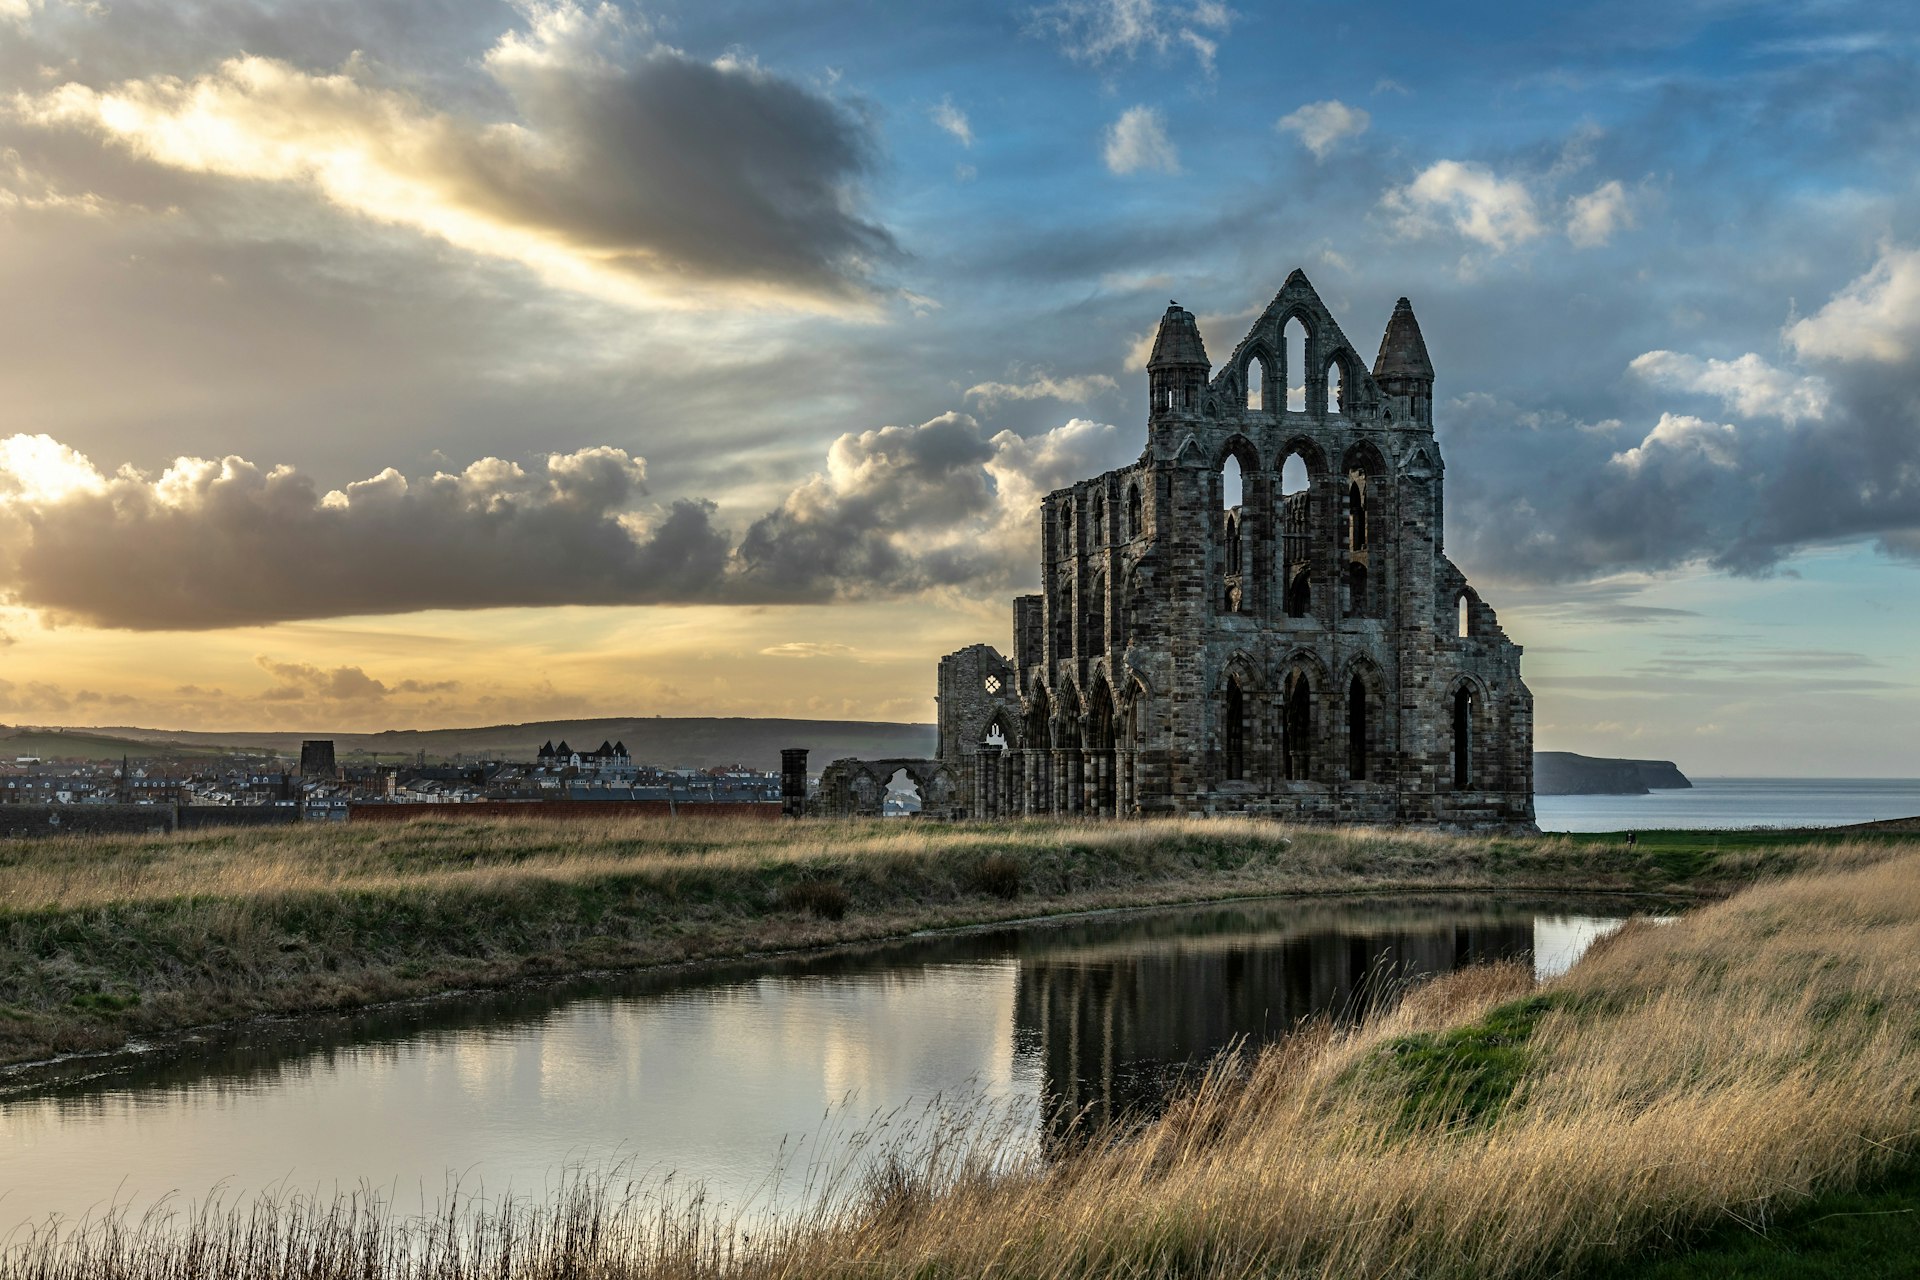 A ruined abbey building on a cliff, fronted by long grass meadows and backed by the sea